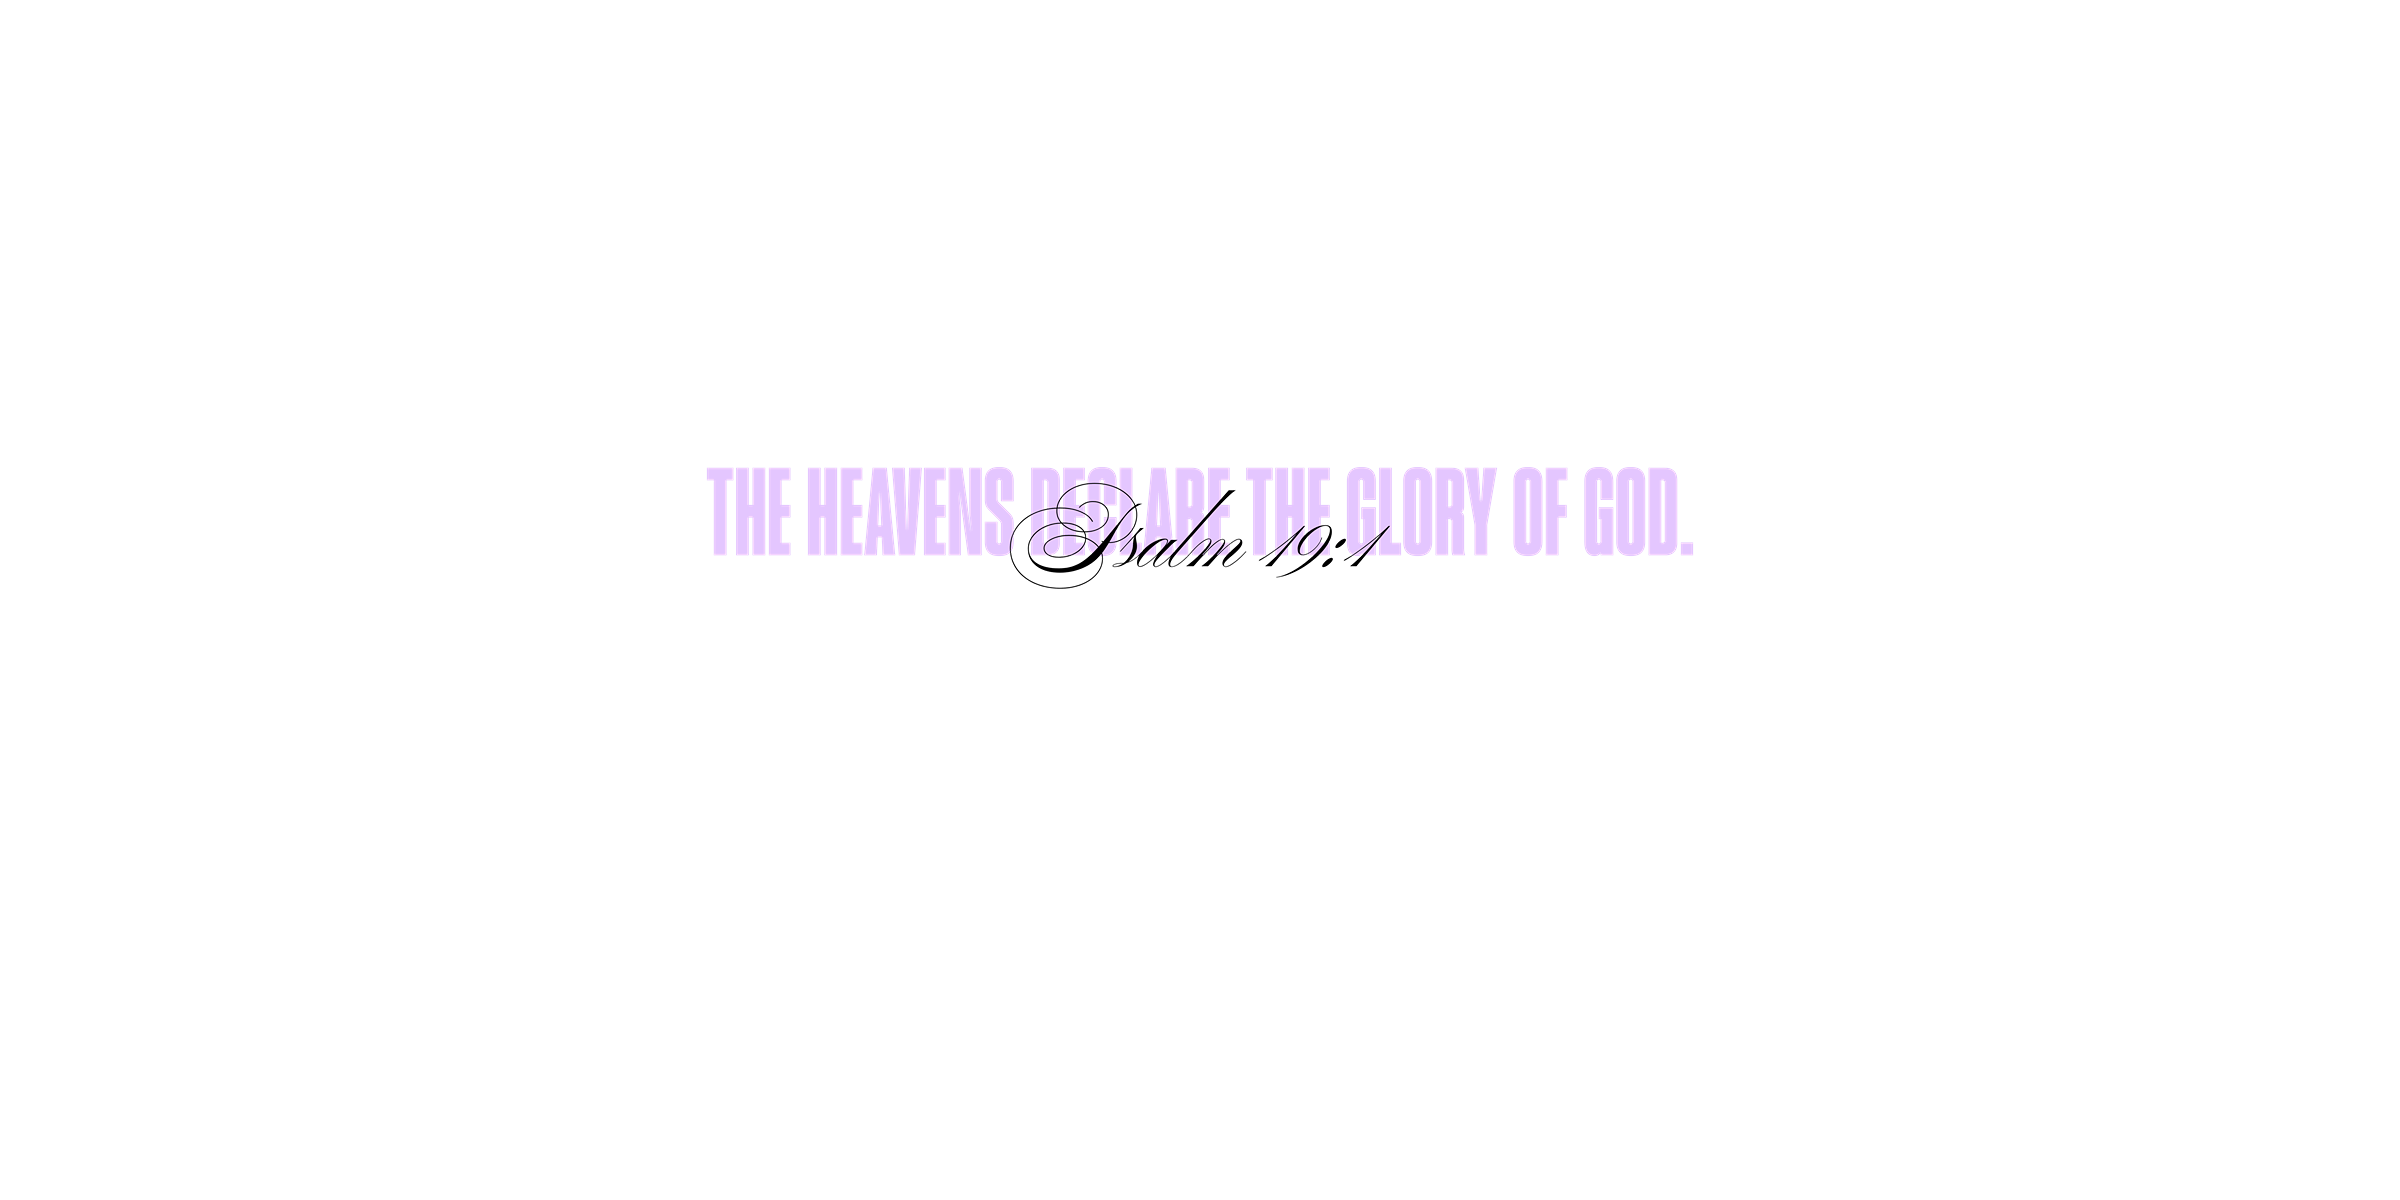 Psalm 19:1 - The heavens declare the glory of God.